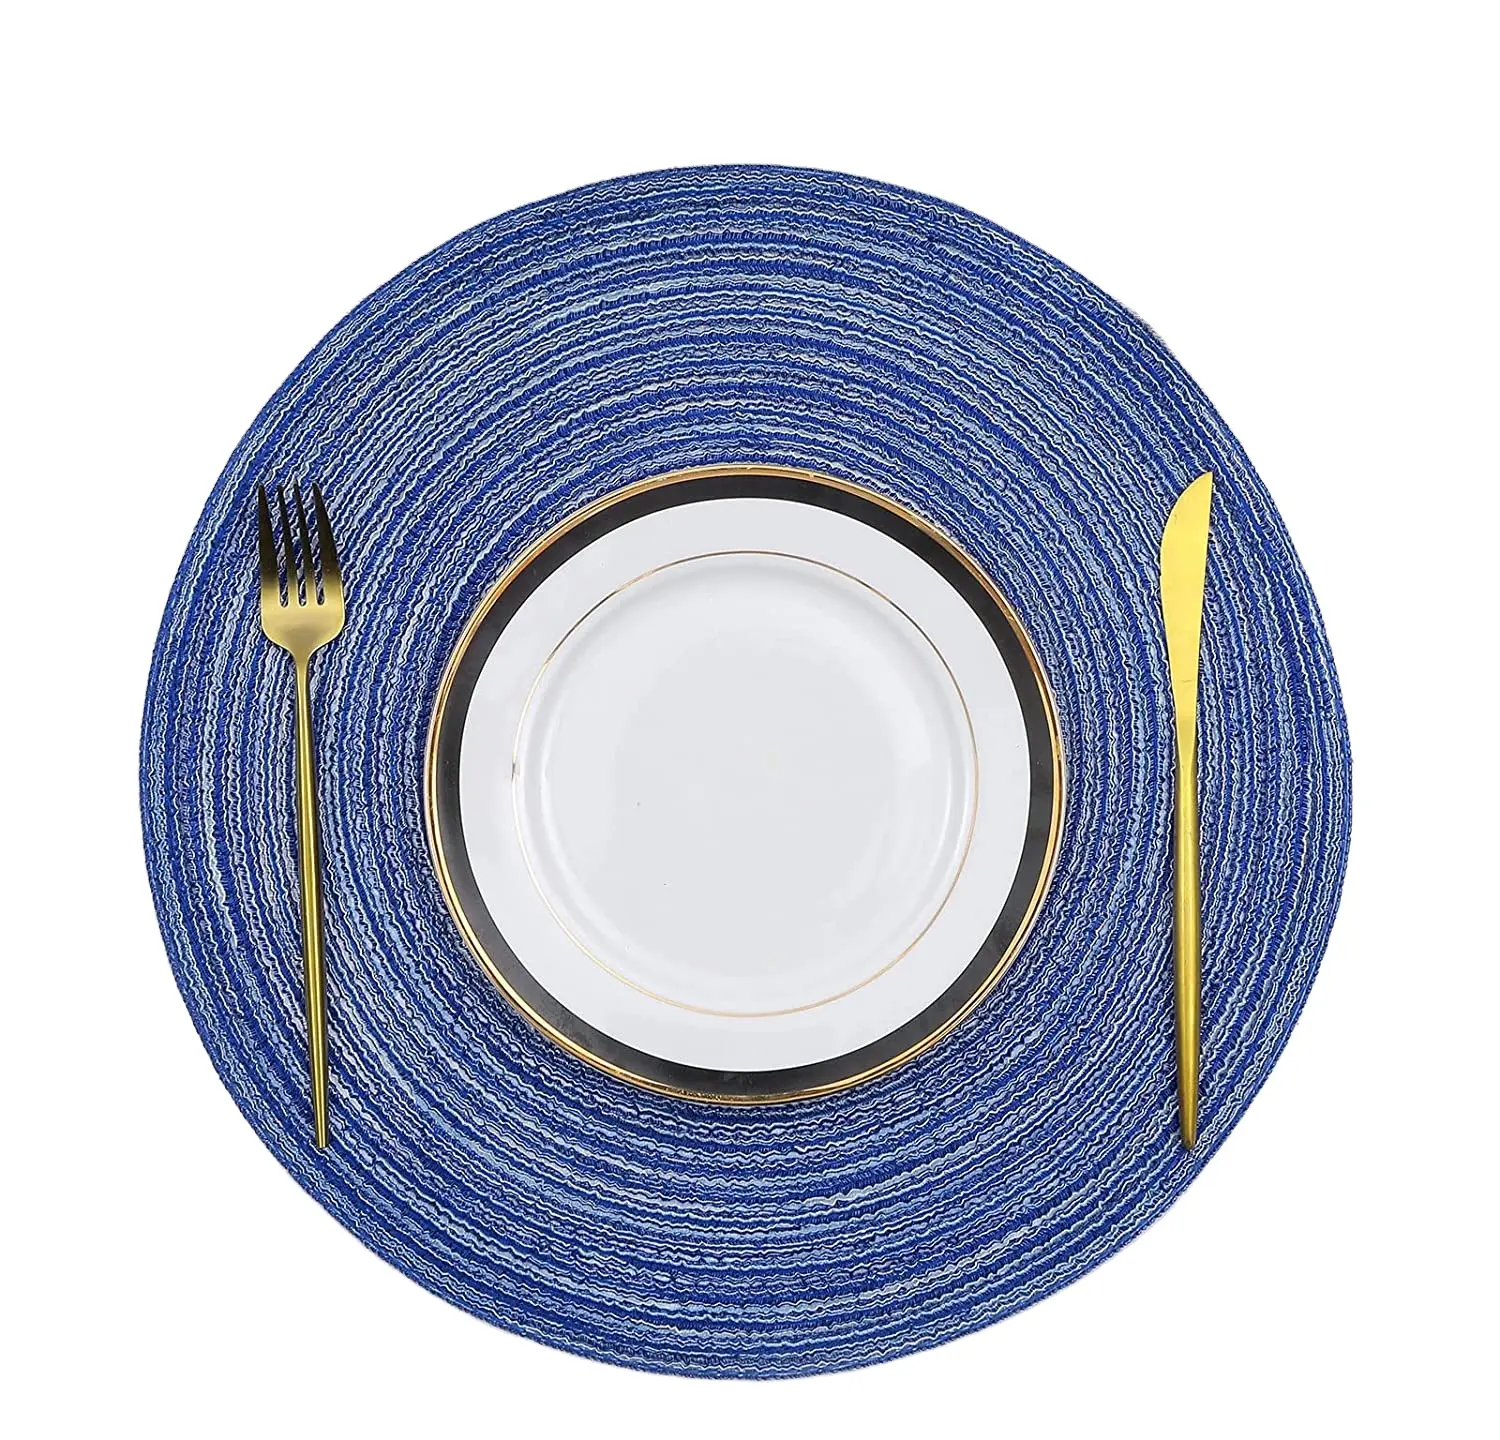 Promotional Various Durable Using Washable Round PP handle Woven Cotton Braided Placemat Set